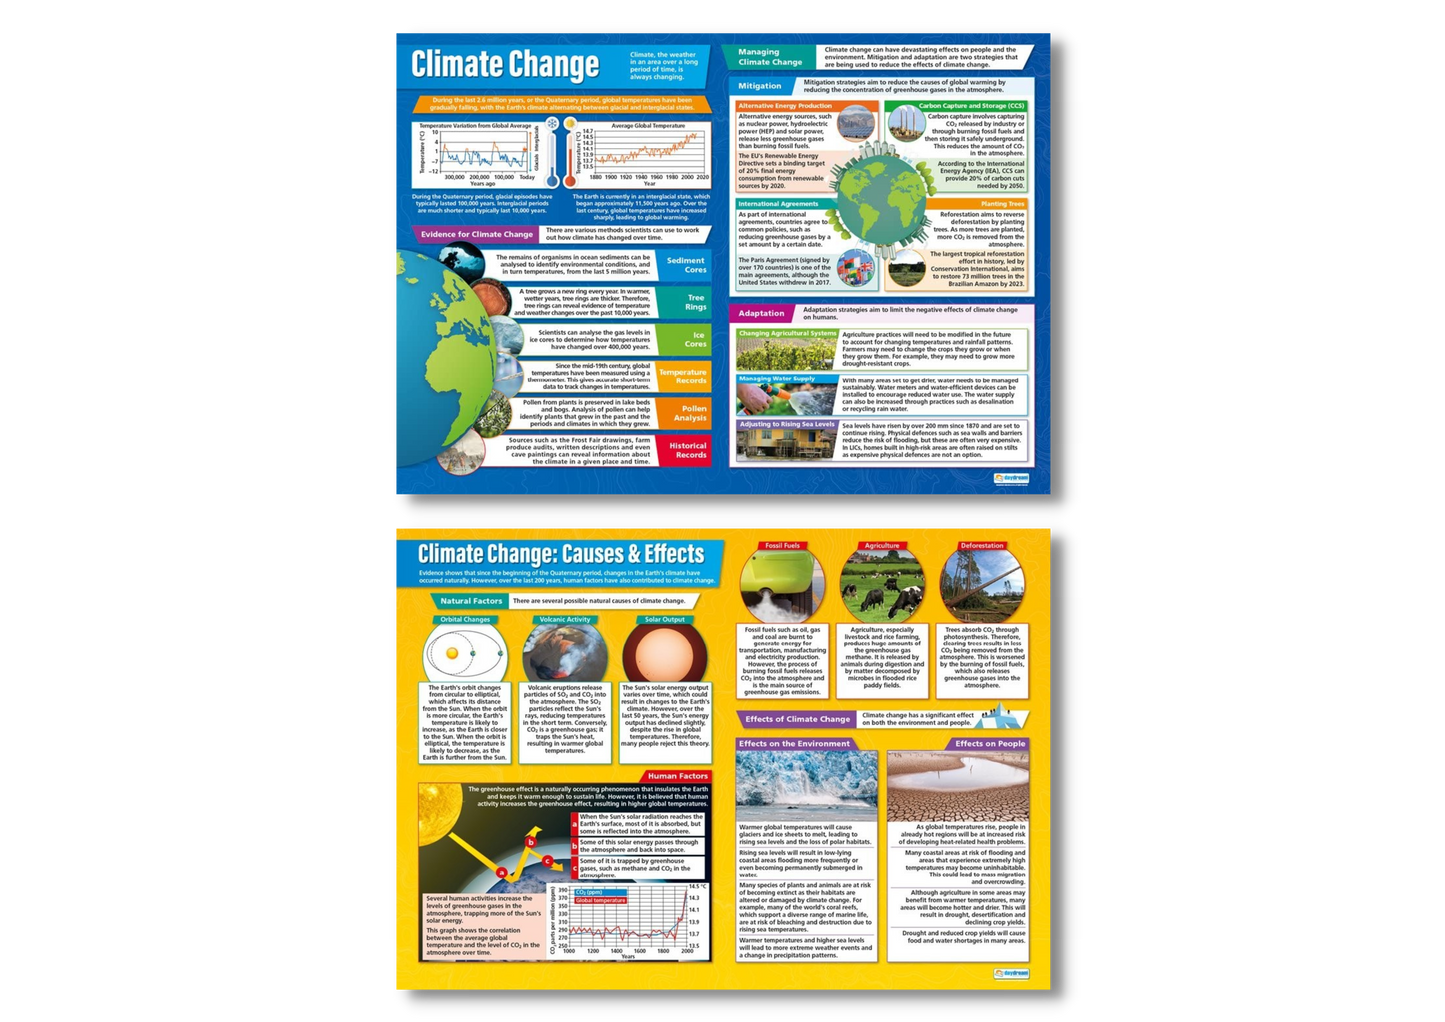 Climate Change, Geography Posters, Geography Charts for the Classroom, Geography Education Charts, Educational School Posters, Classroom Posters, Perfect for Geography Teachers, Humanities Classroom, Humanities Poster, Learning Resource, Visual Learning, Classroom Decor 